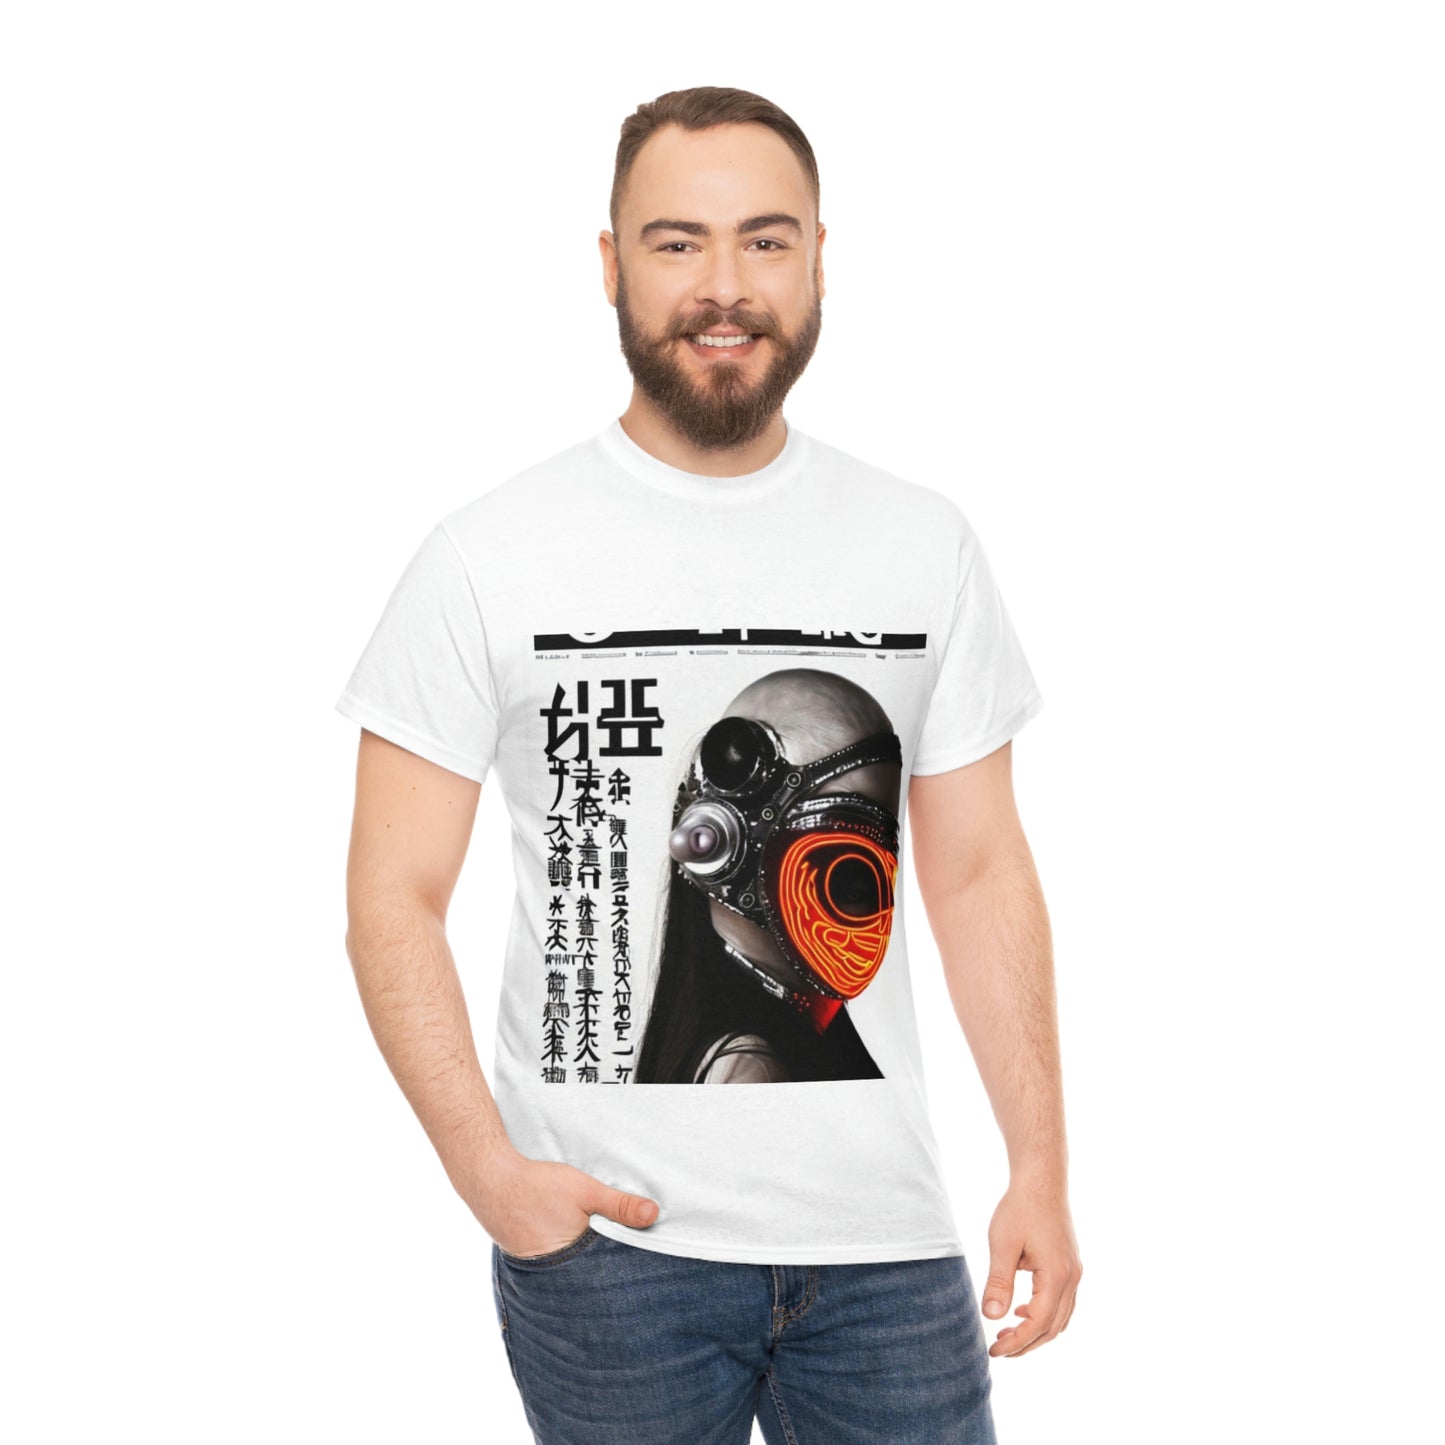 Experienced Hardship - Indigenous Dystopian Warrior  T-Shirt Collection